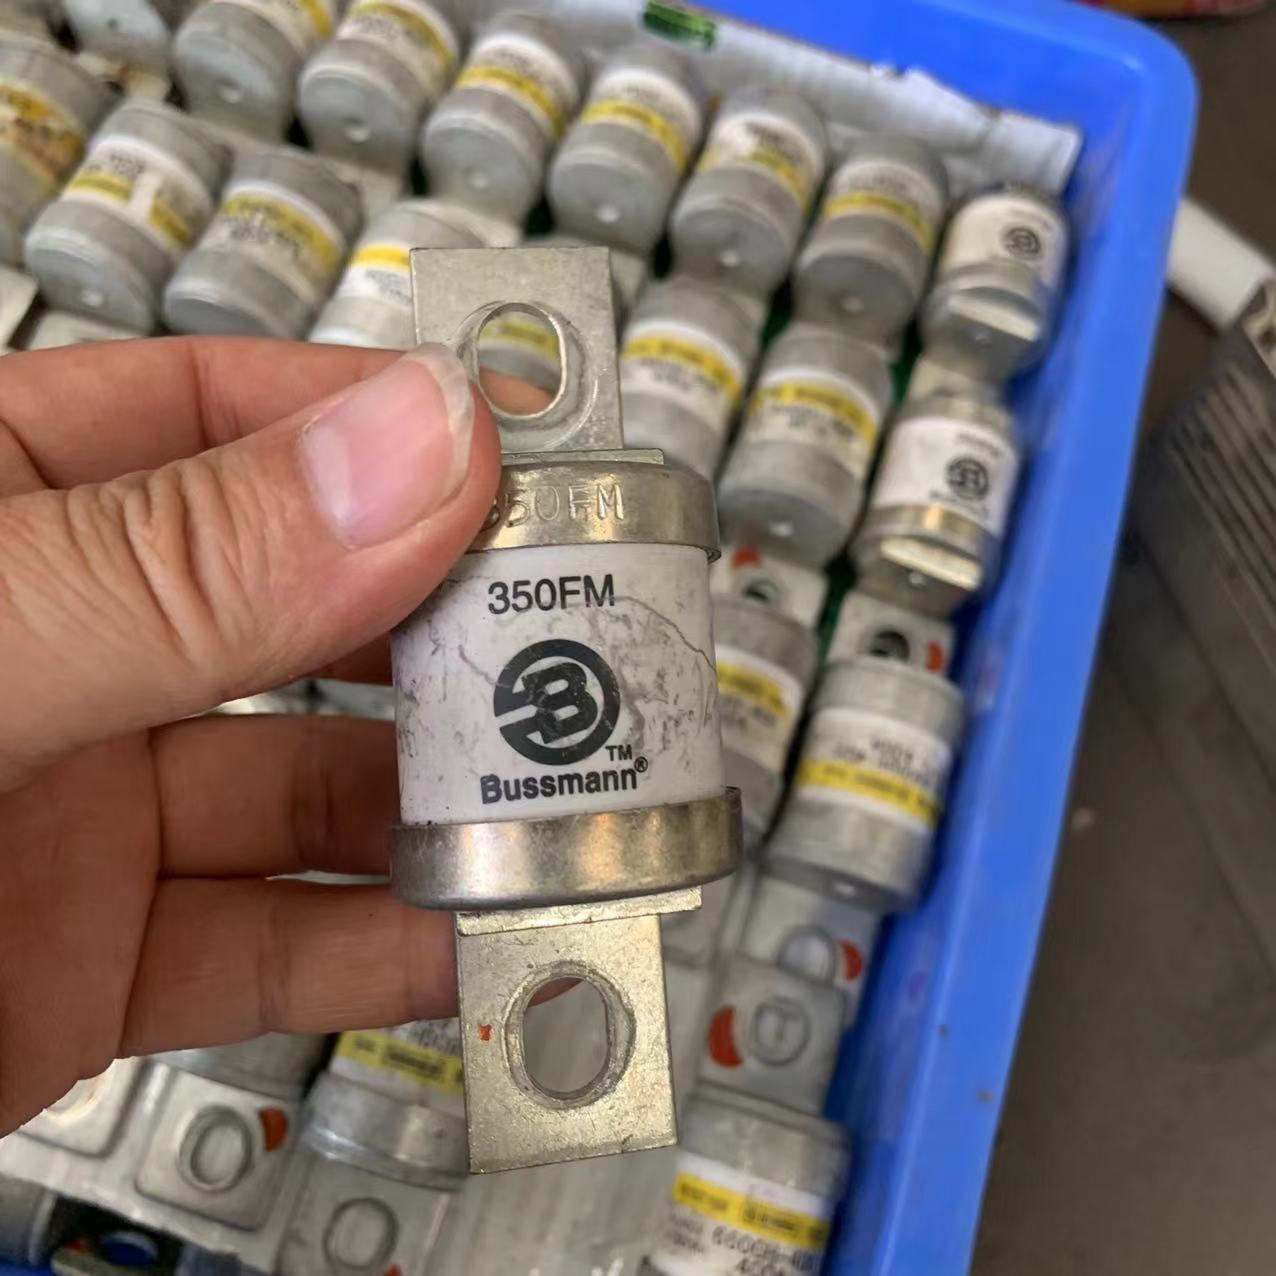 BUSSMANN 350FM FUSE USED and tested